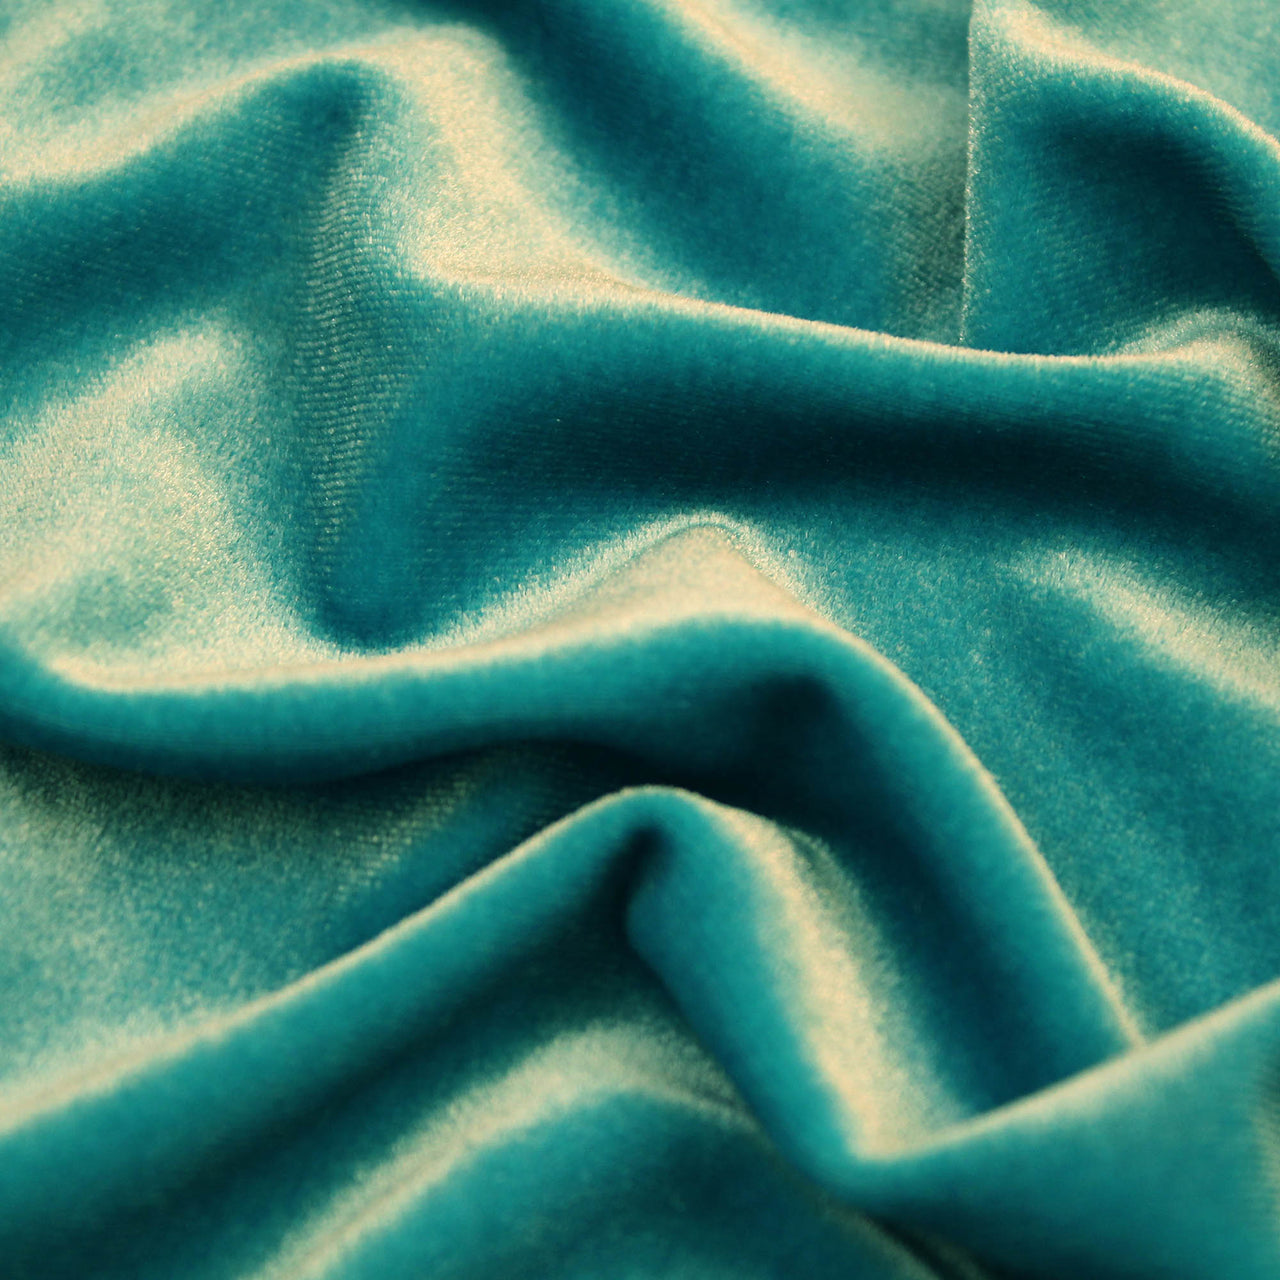 Turquoise - Spandex Velvet Fabric (4 Way Stretch) - Superior Quality for Dance & Leotards